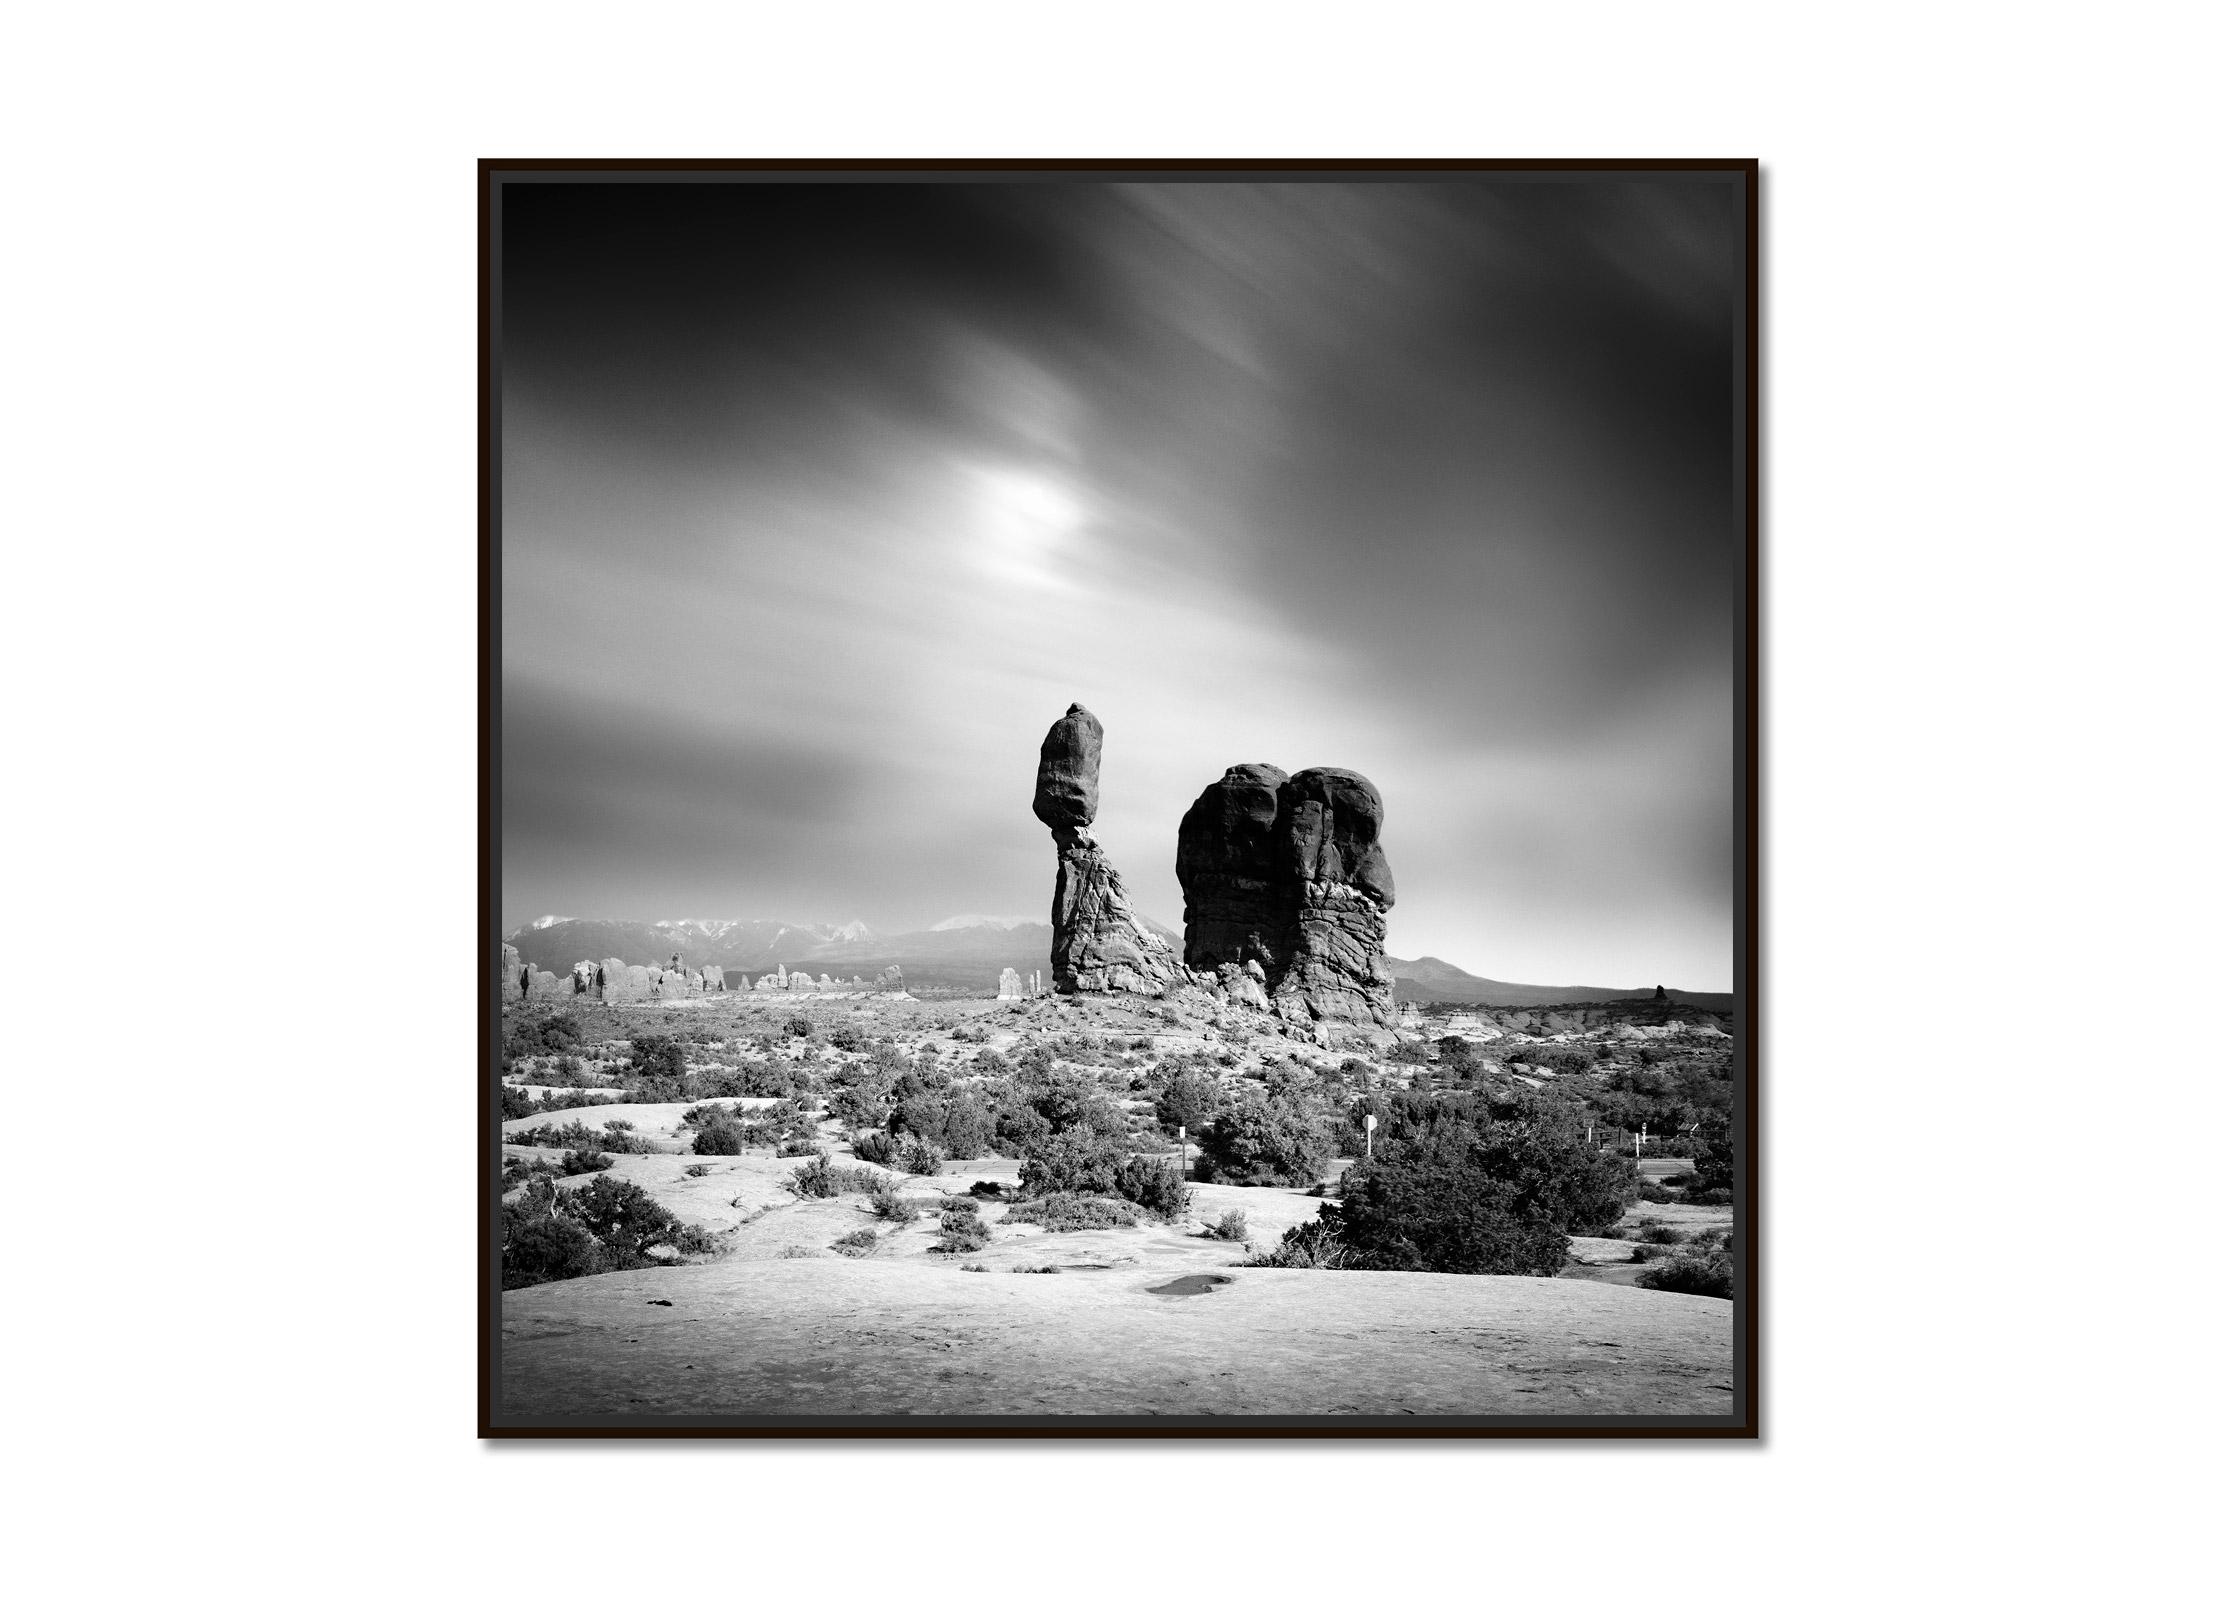 Wild West, Balanced Rock, Utah, USA, black and white art photography, landscape - Photograph by Gerald Berghammer